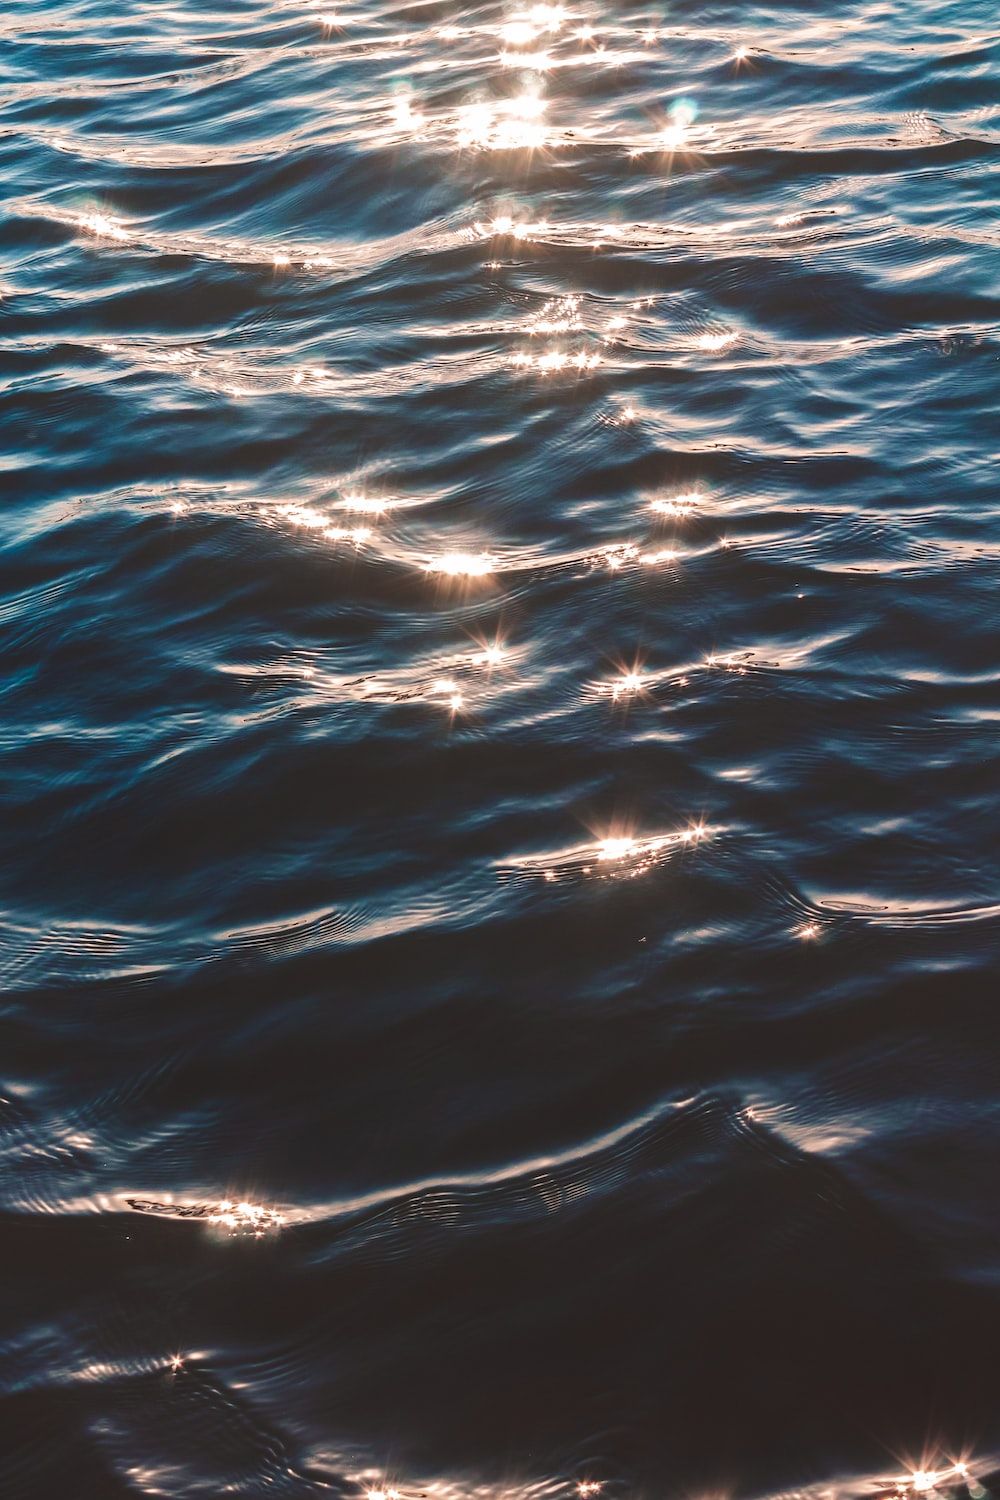 A body of water with sunlight shining on it - Ocean, wave, water